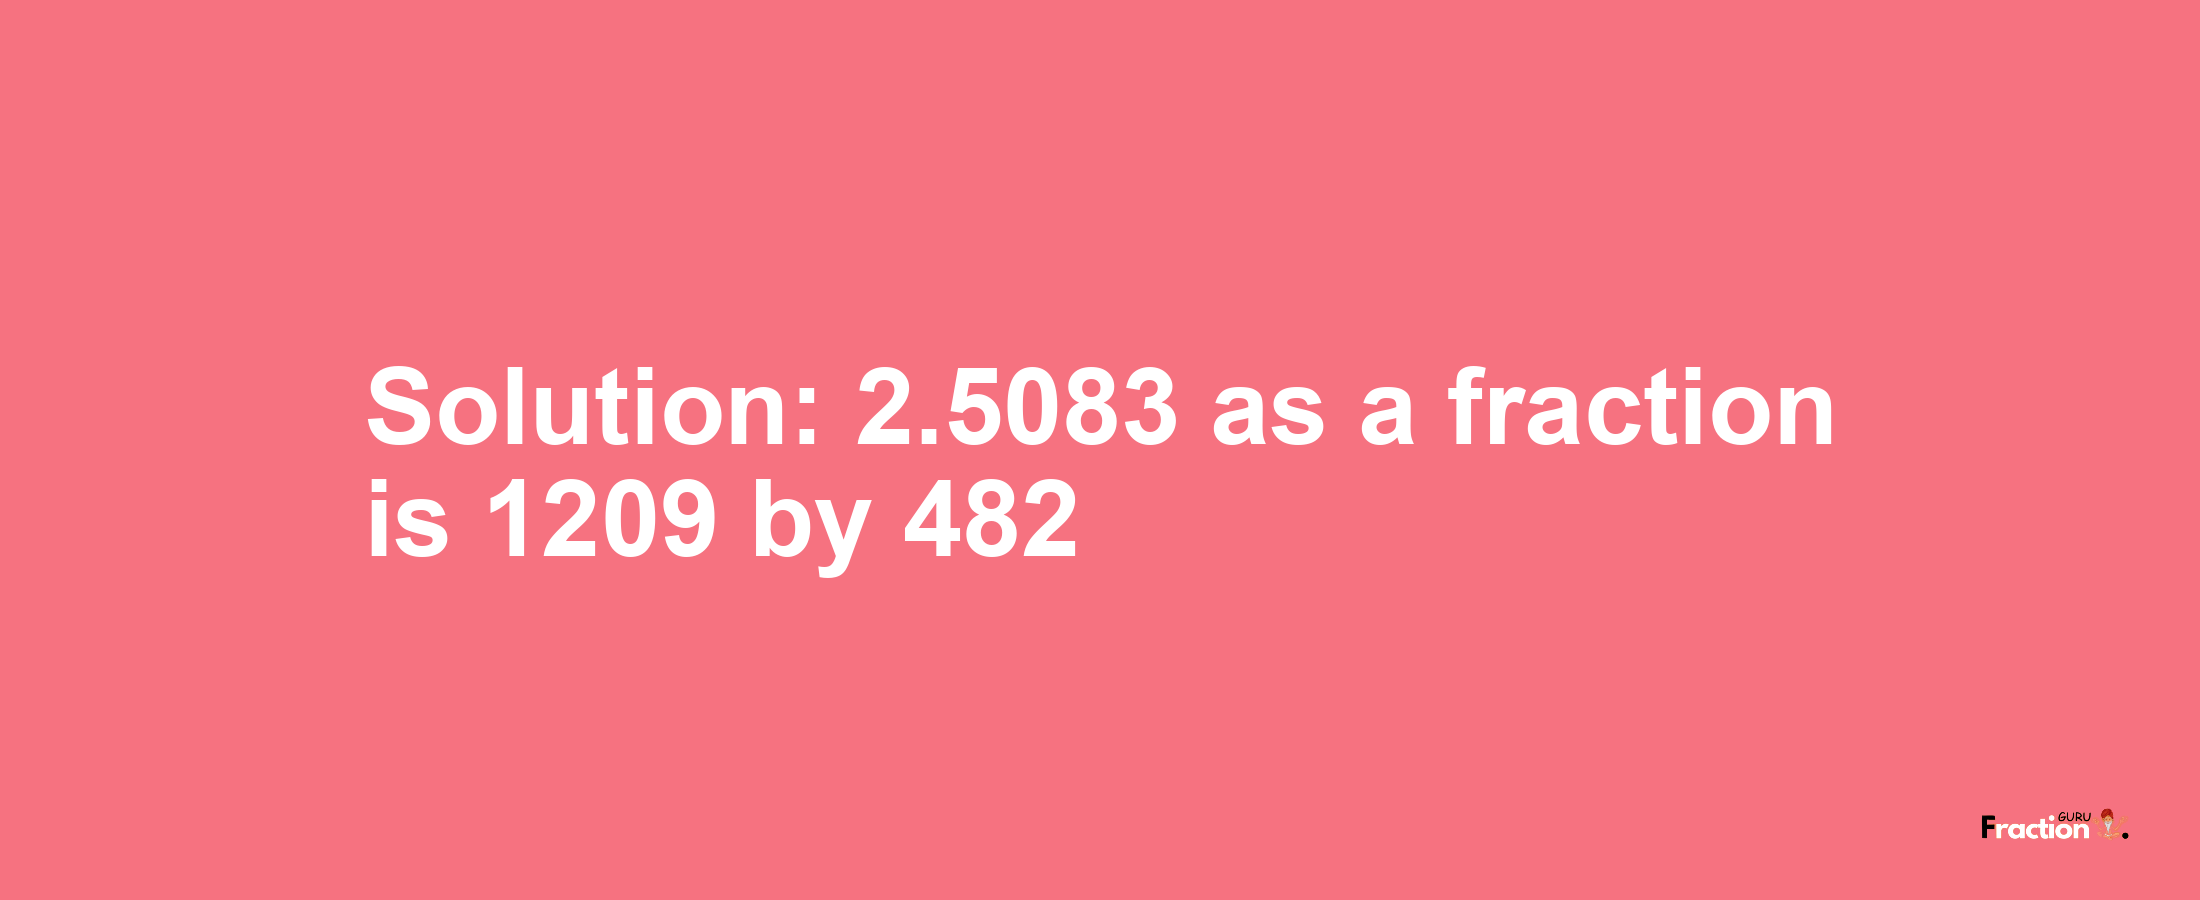 Solution:2.5083 as a fraction is 1209/482